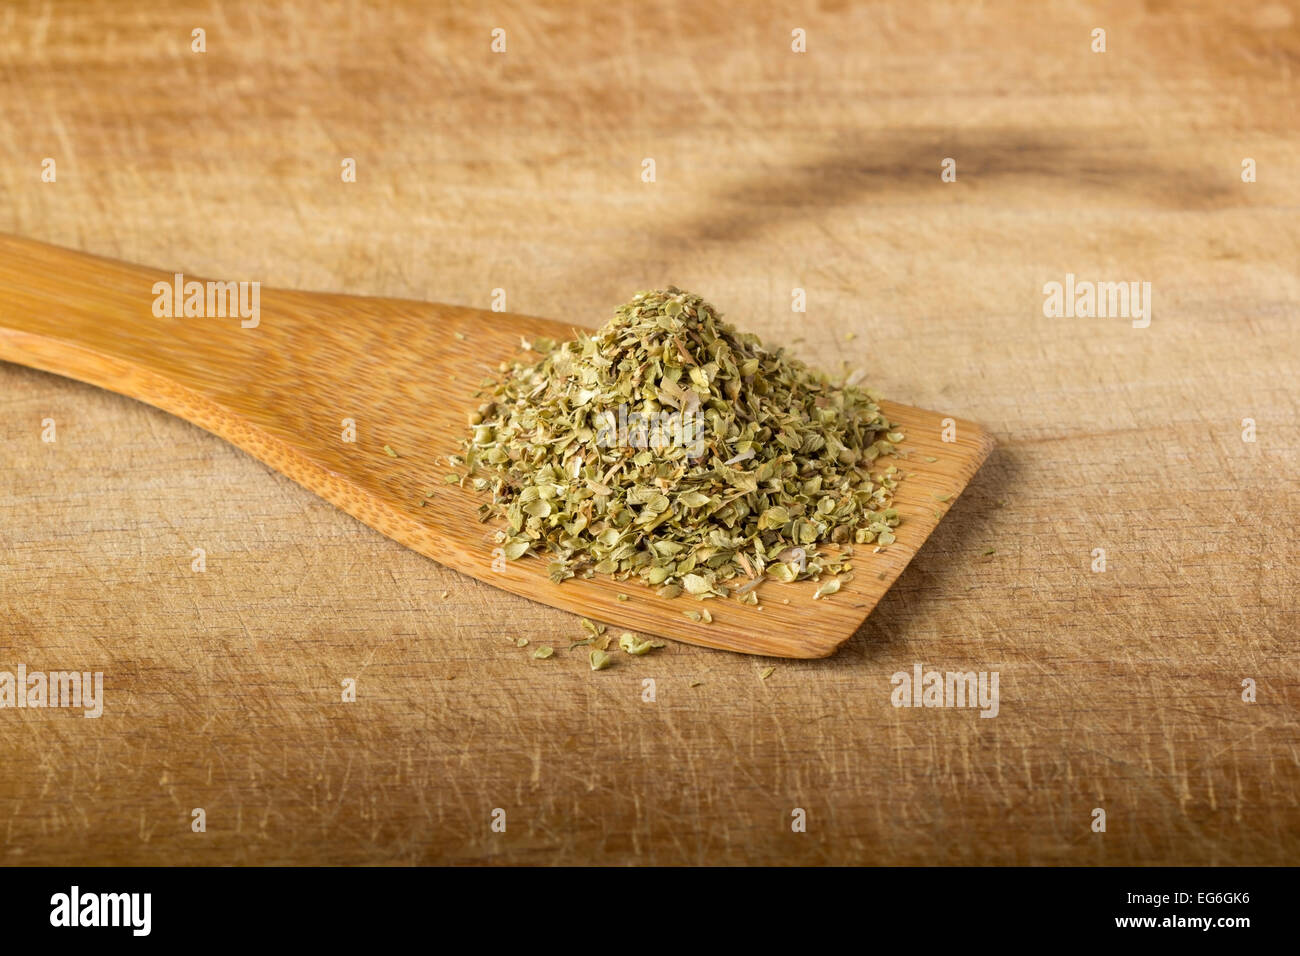 Oregano in a wooden spoon over wood background Stock Photo